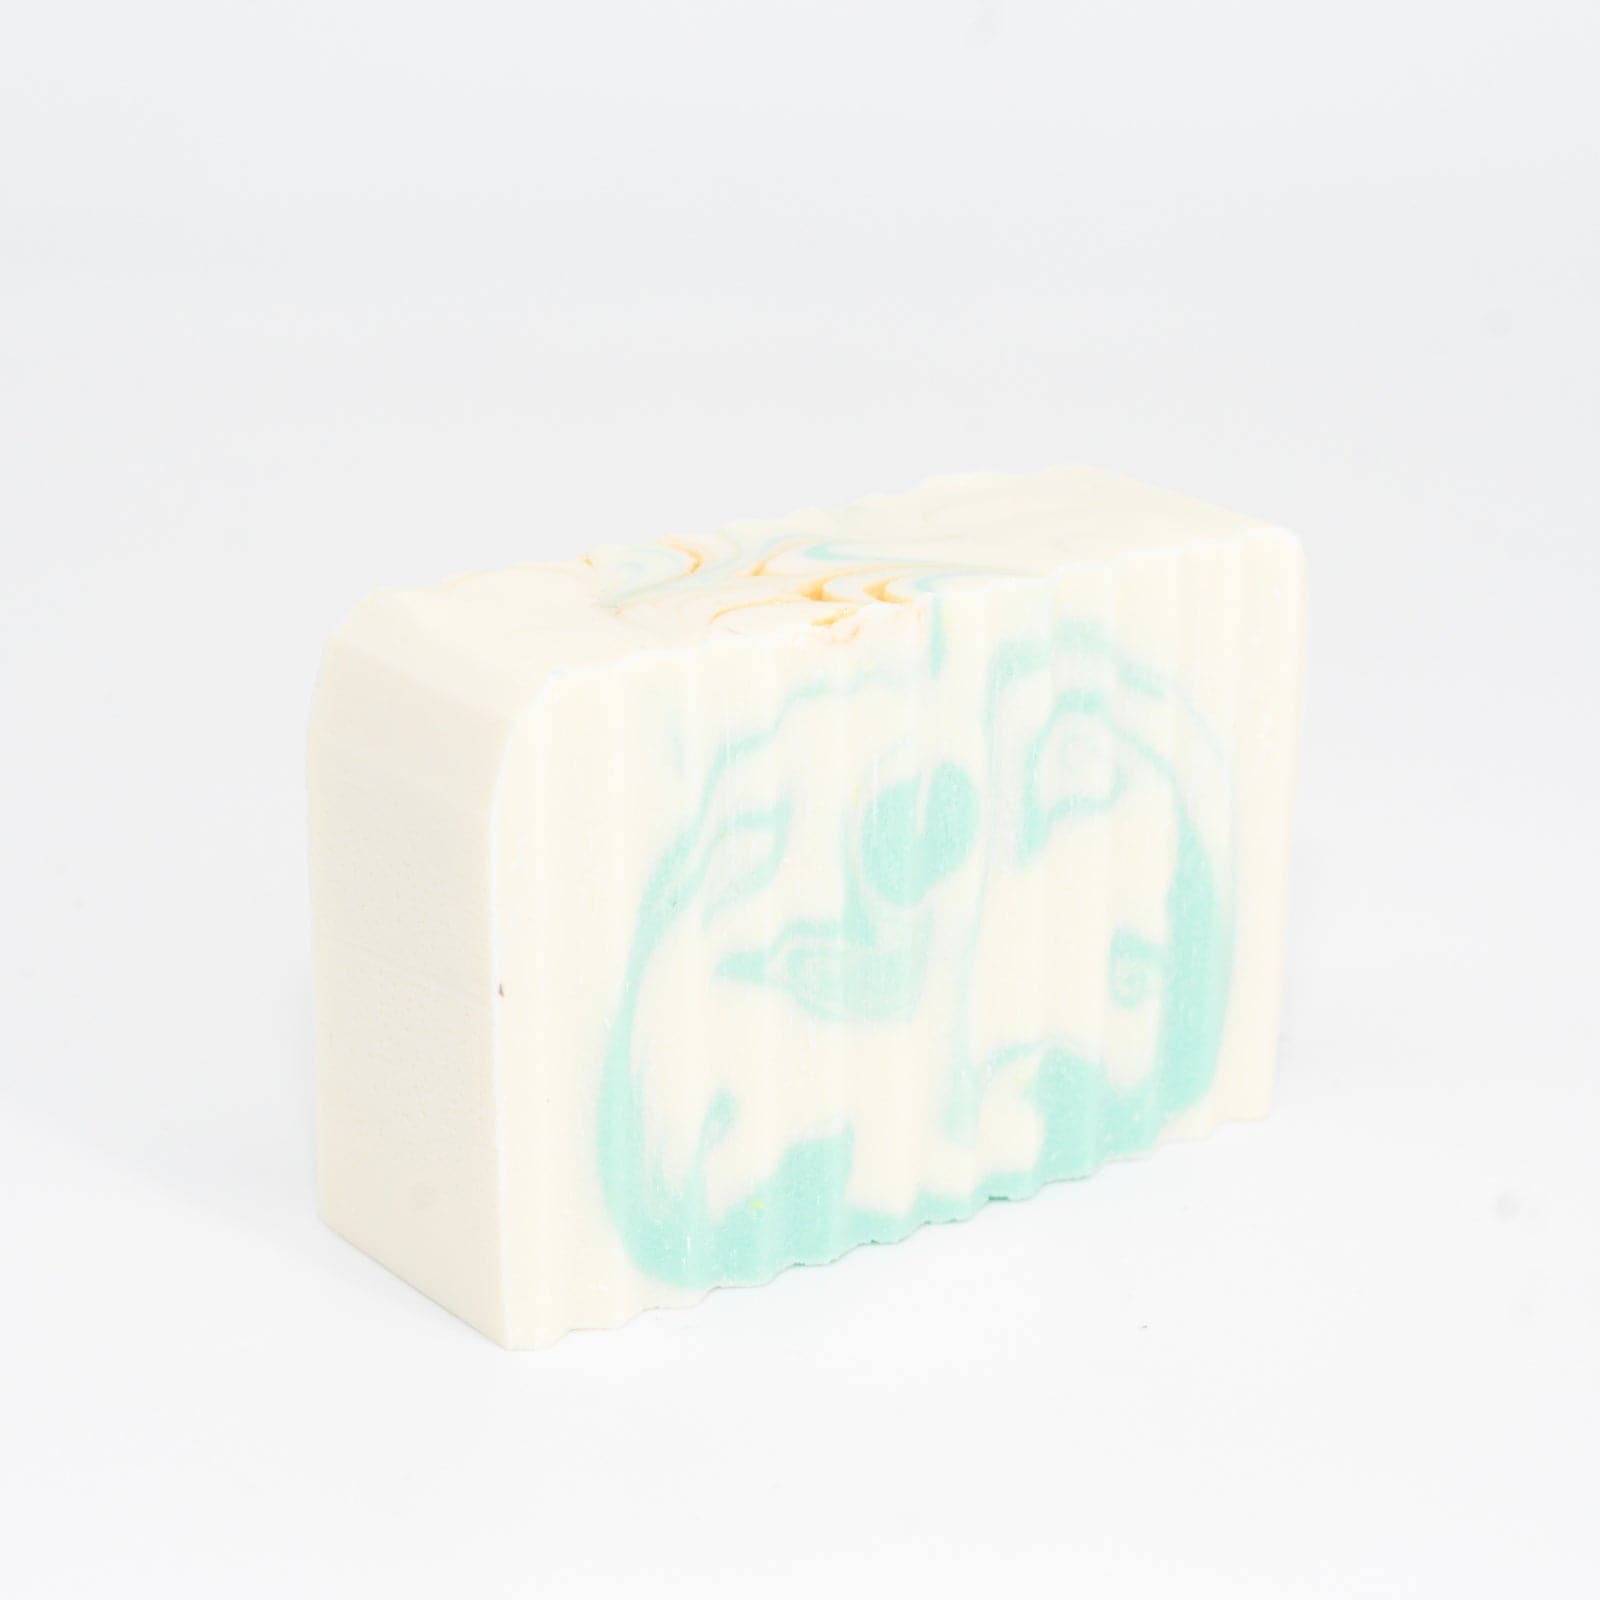 Narcissist Soap Bar with blue and bronze swirls on side against white background